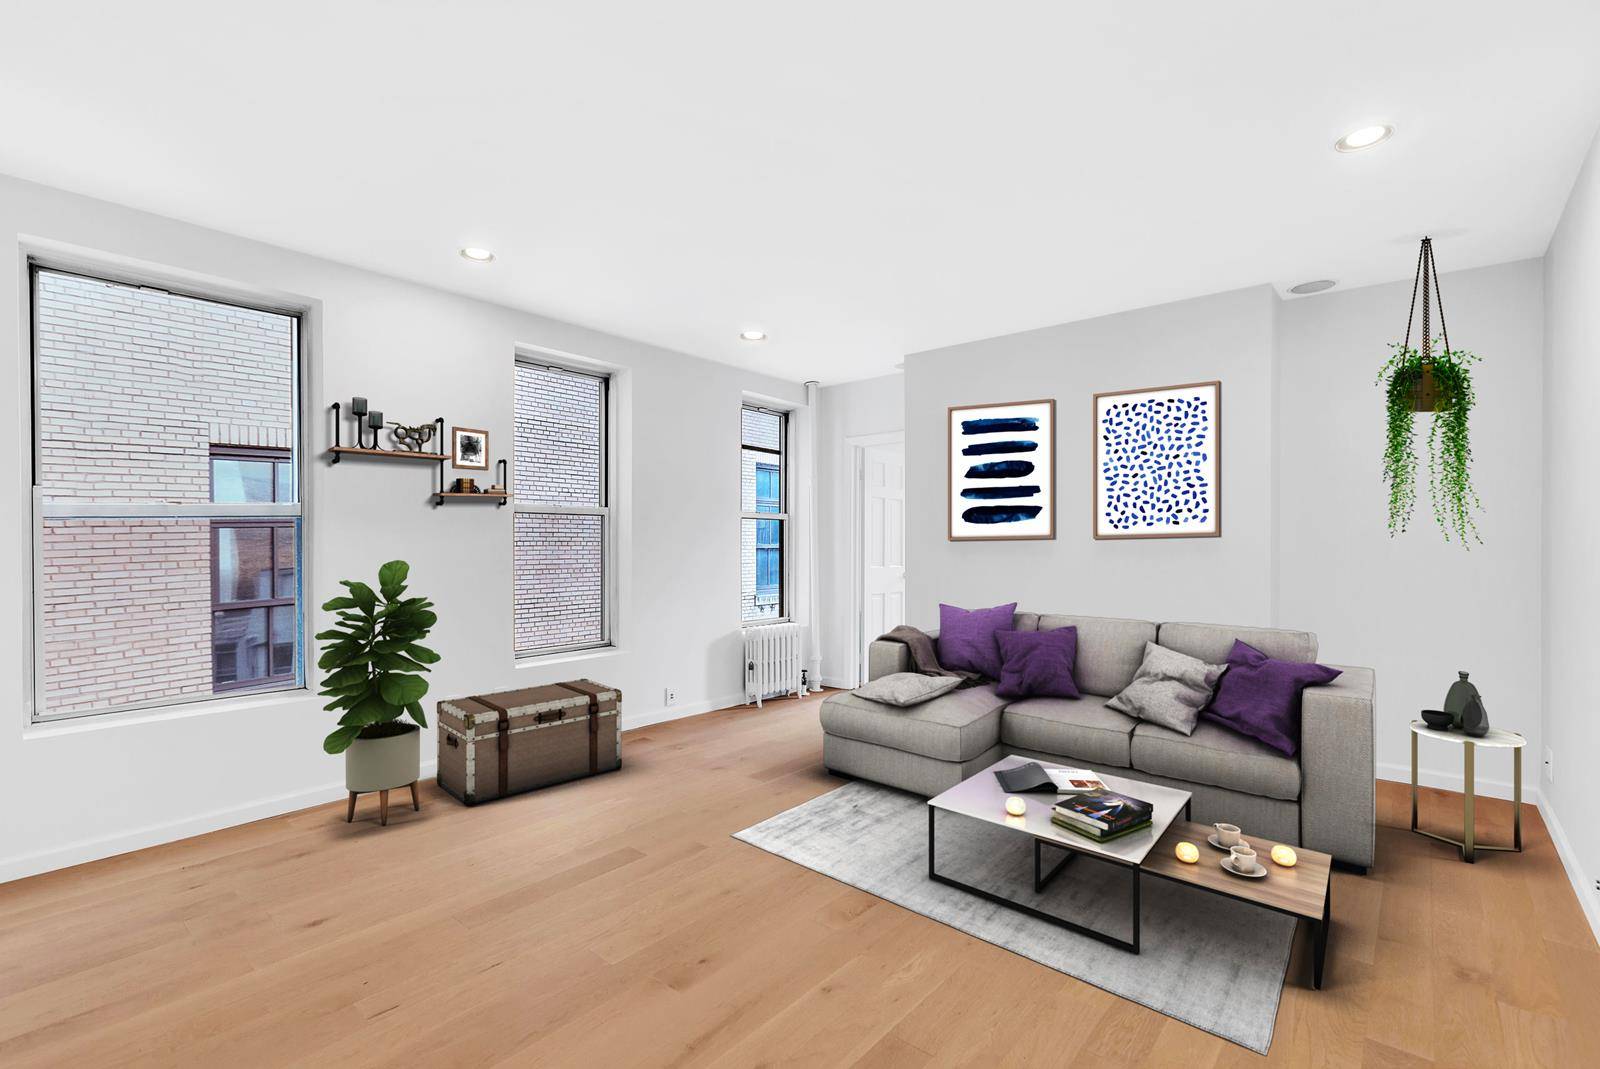 Nestled within a quiet tree lined street in the heart of Chelsea, this comfortable one bedroom apartment with high ceilings is a wonderful place to call home.